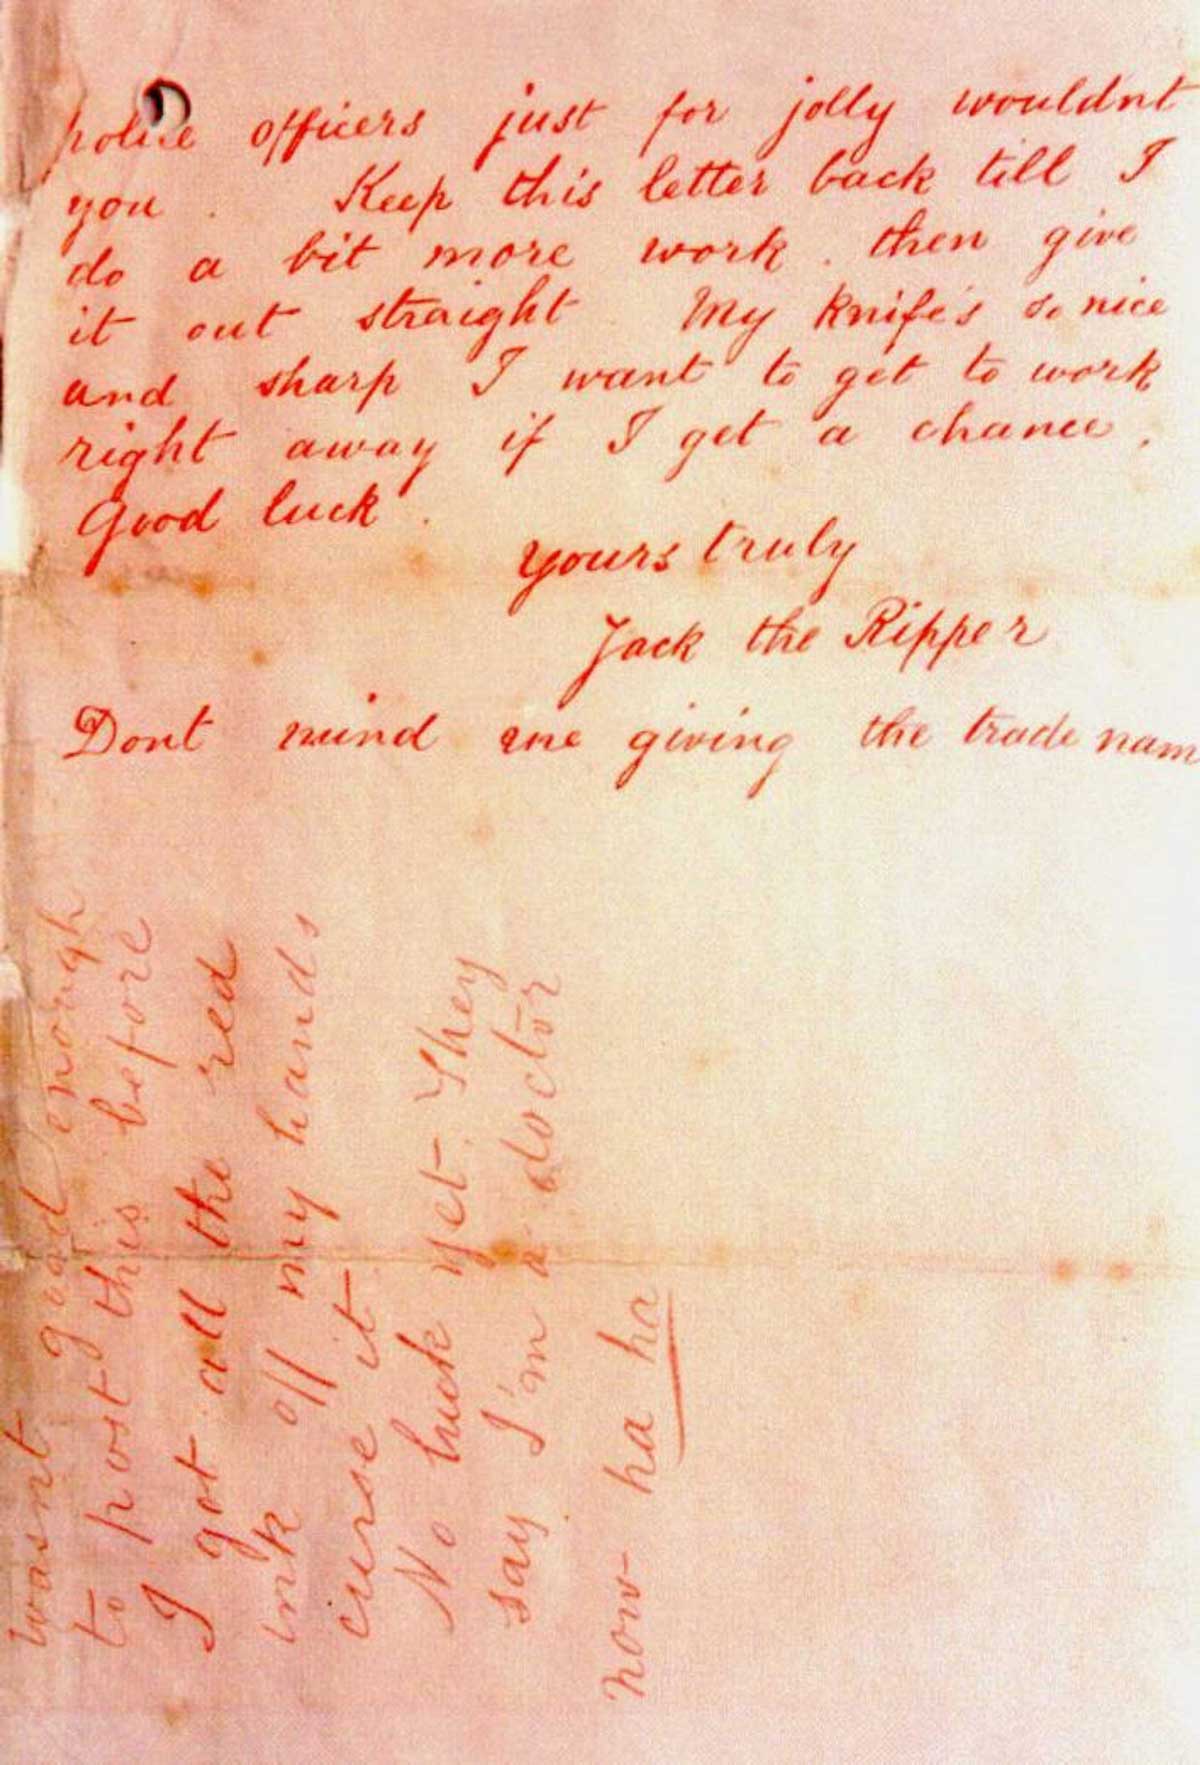 "DEAR BOSS" LETTER WAS THE FIRST TIME JACK THE RIPPER NAME WAS USED HISTORY 